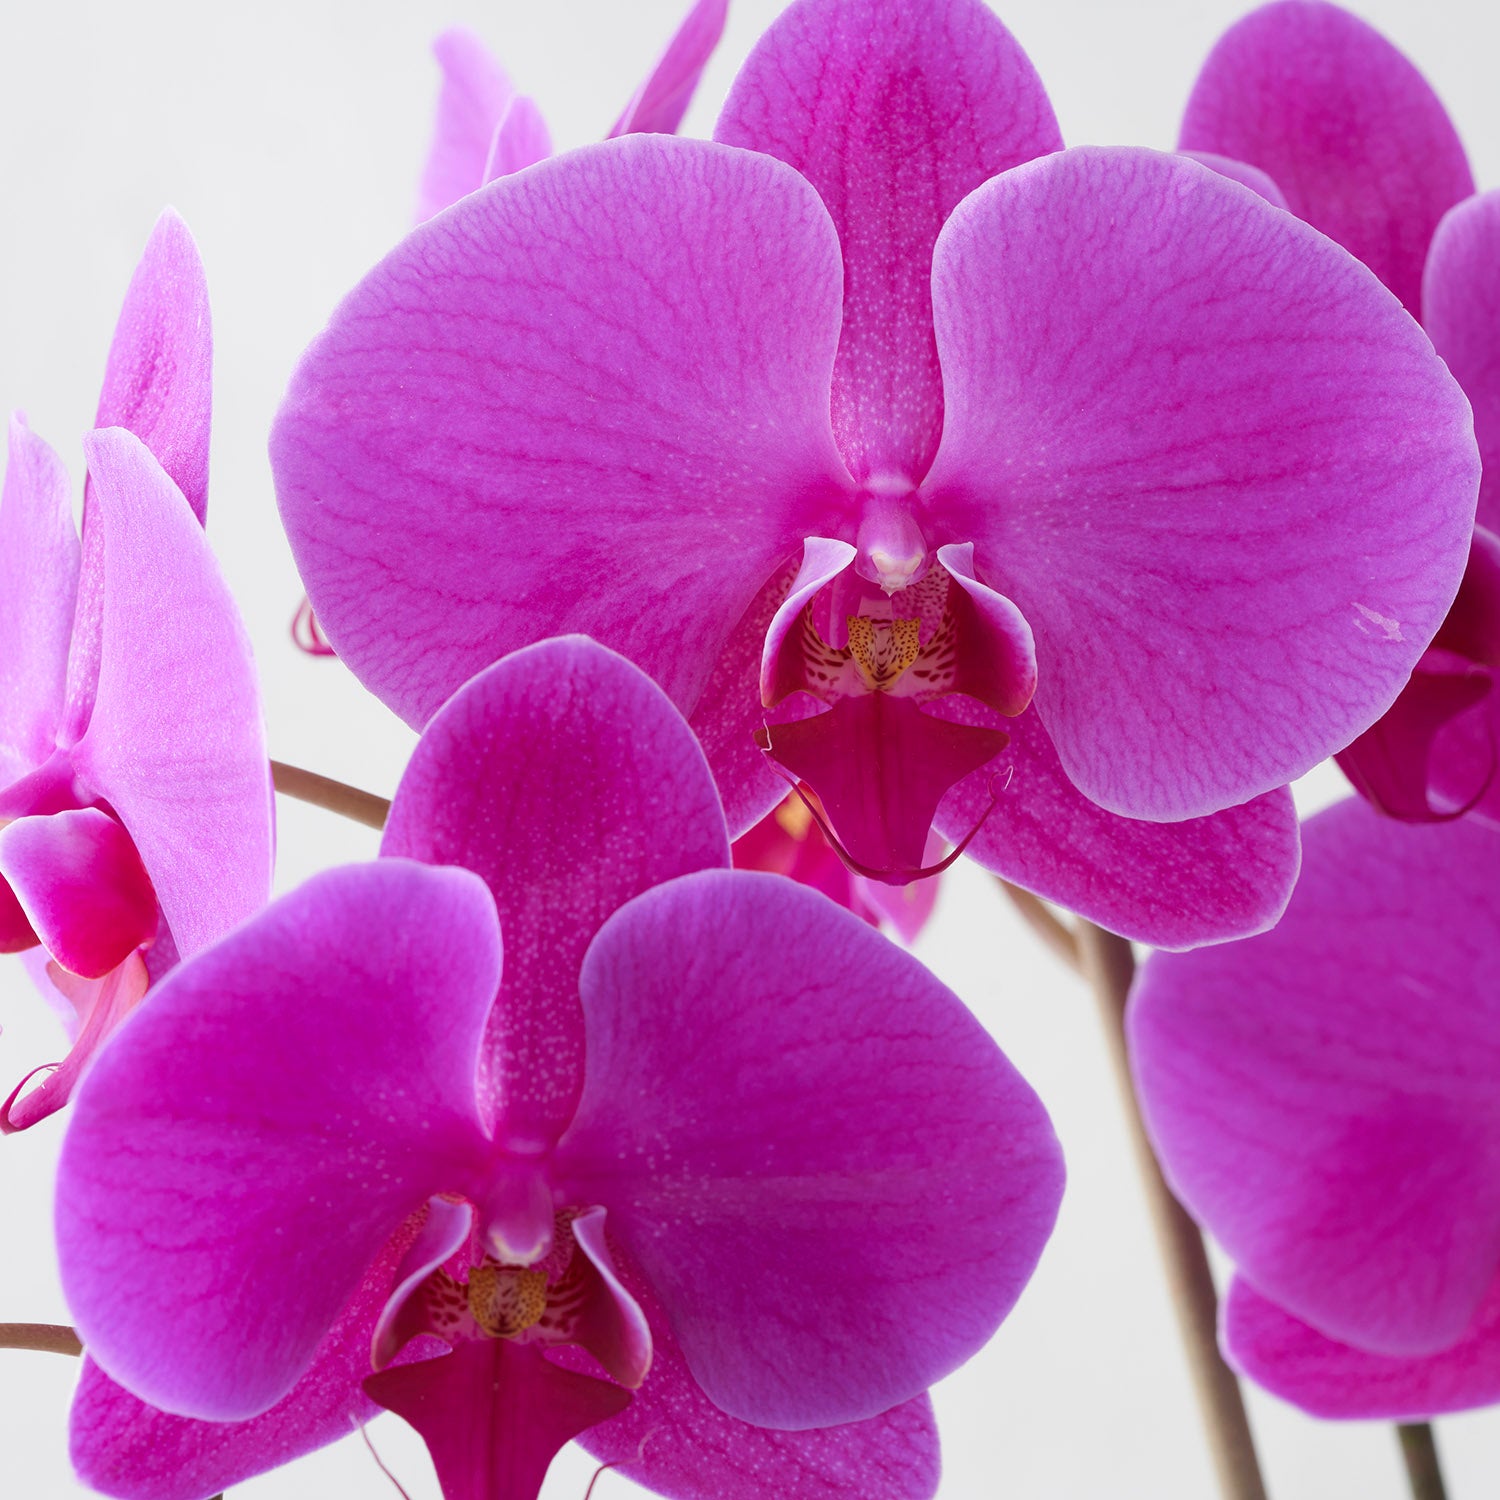 Closeup of fuchsia pink phalaenopsis orchid flowers on white background.